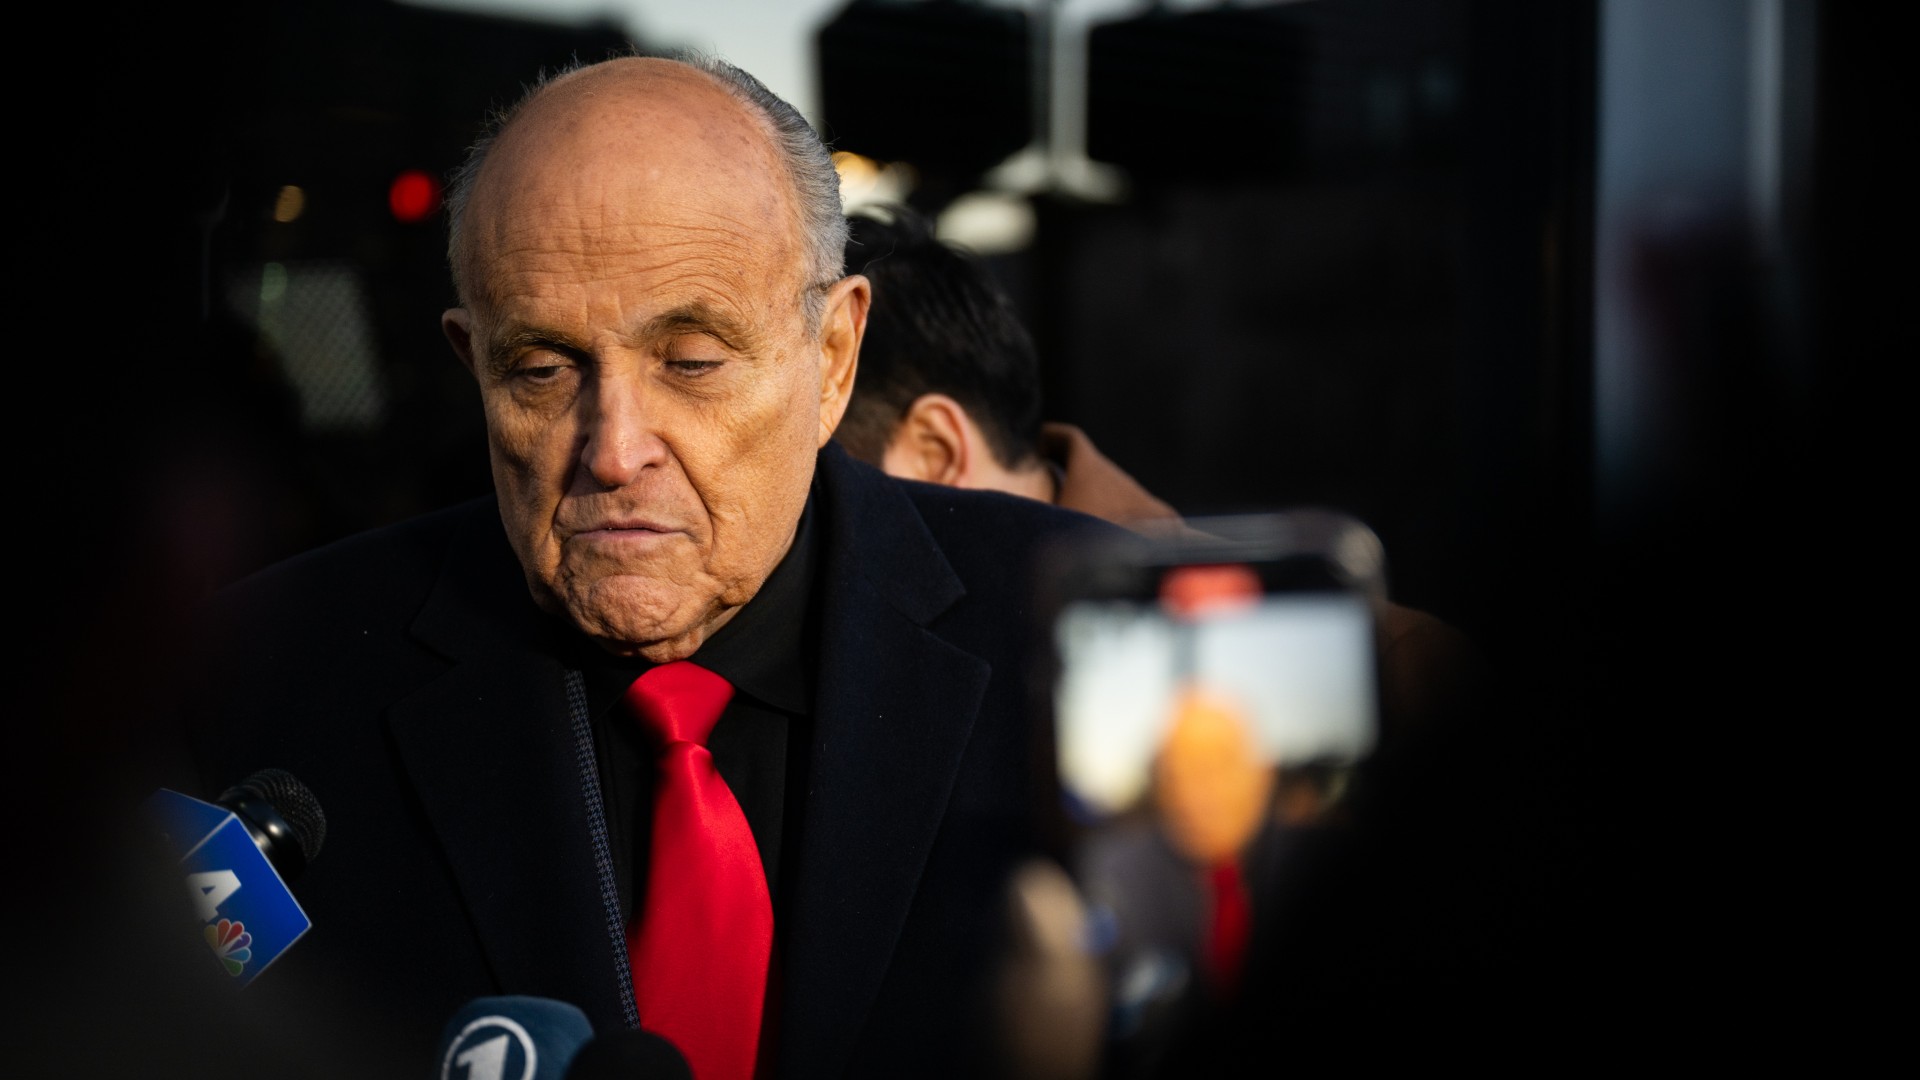  Giuliani to pay $400k to end bankruptcy case  